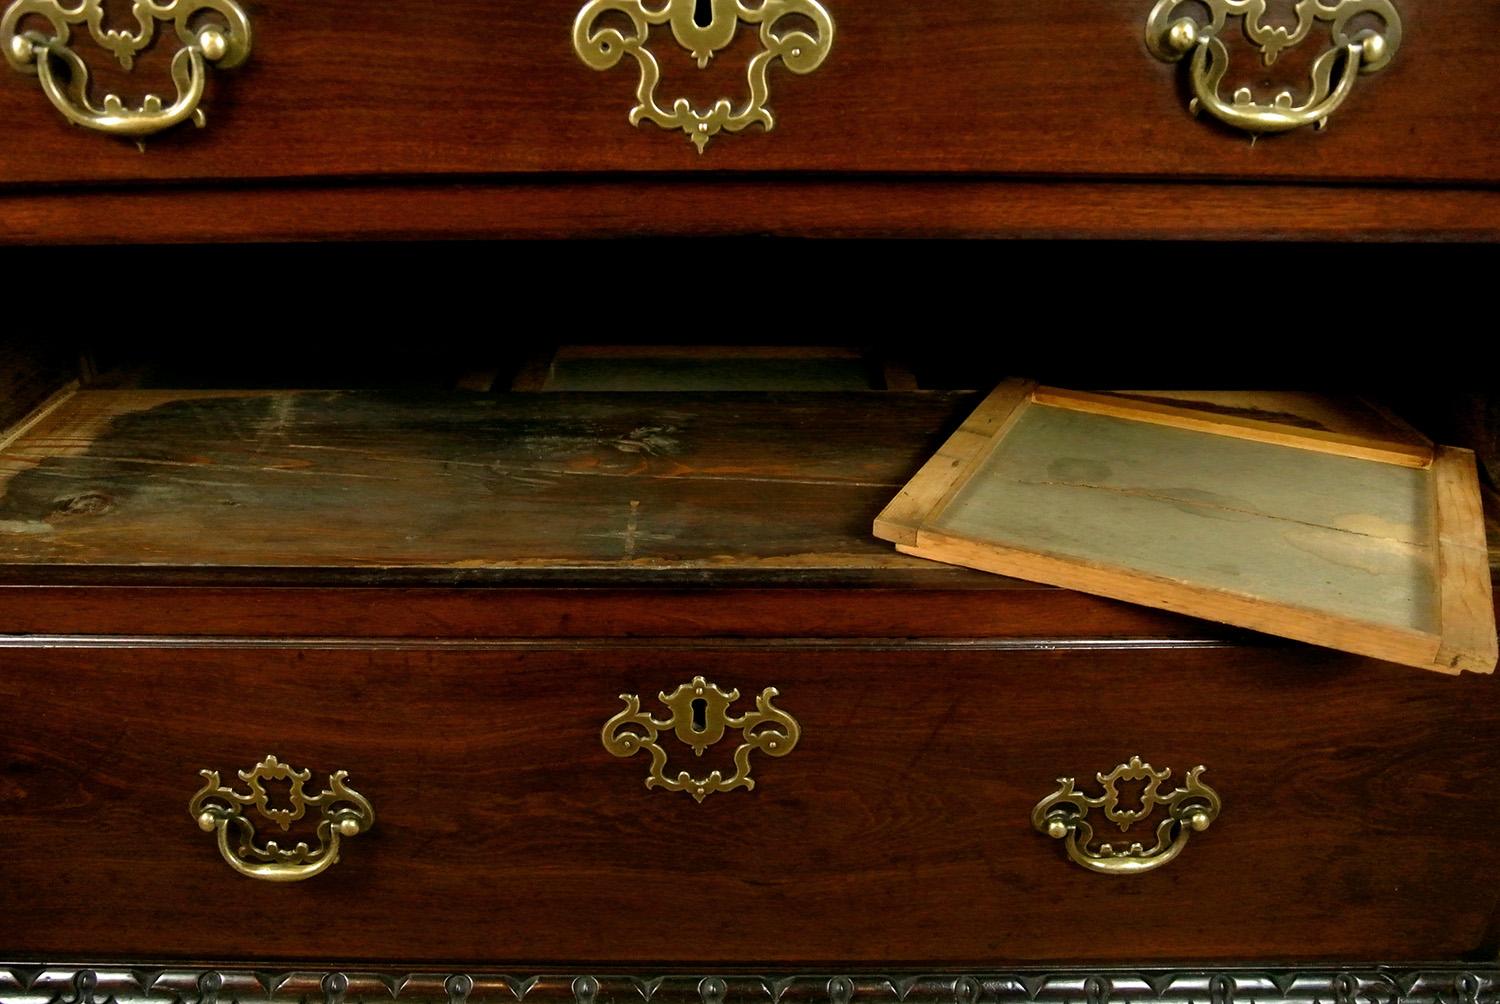 Exceptional Rare and Fine Padouk Wood Bureau in the Chippendale Manner, c. 1780 For Sale 4